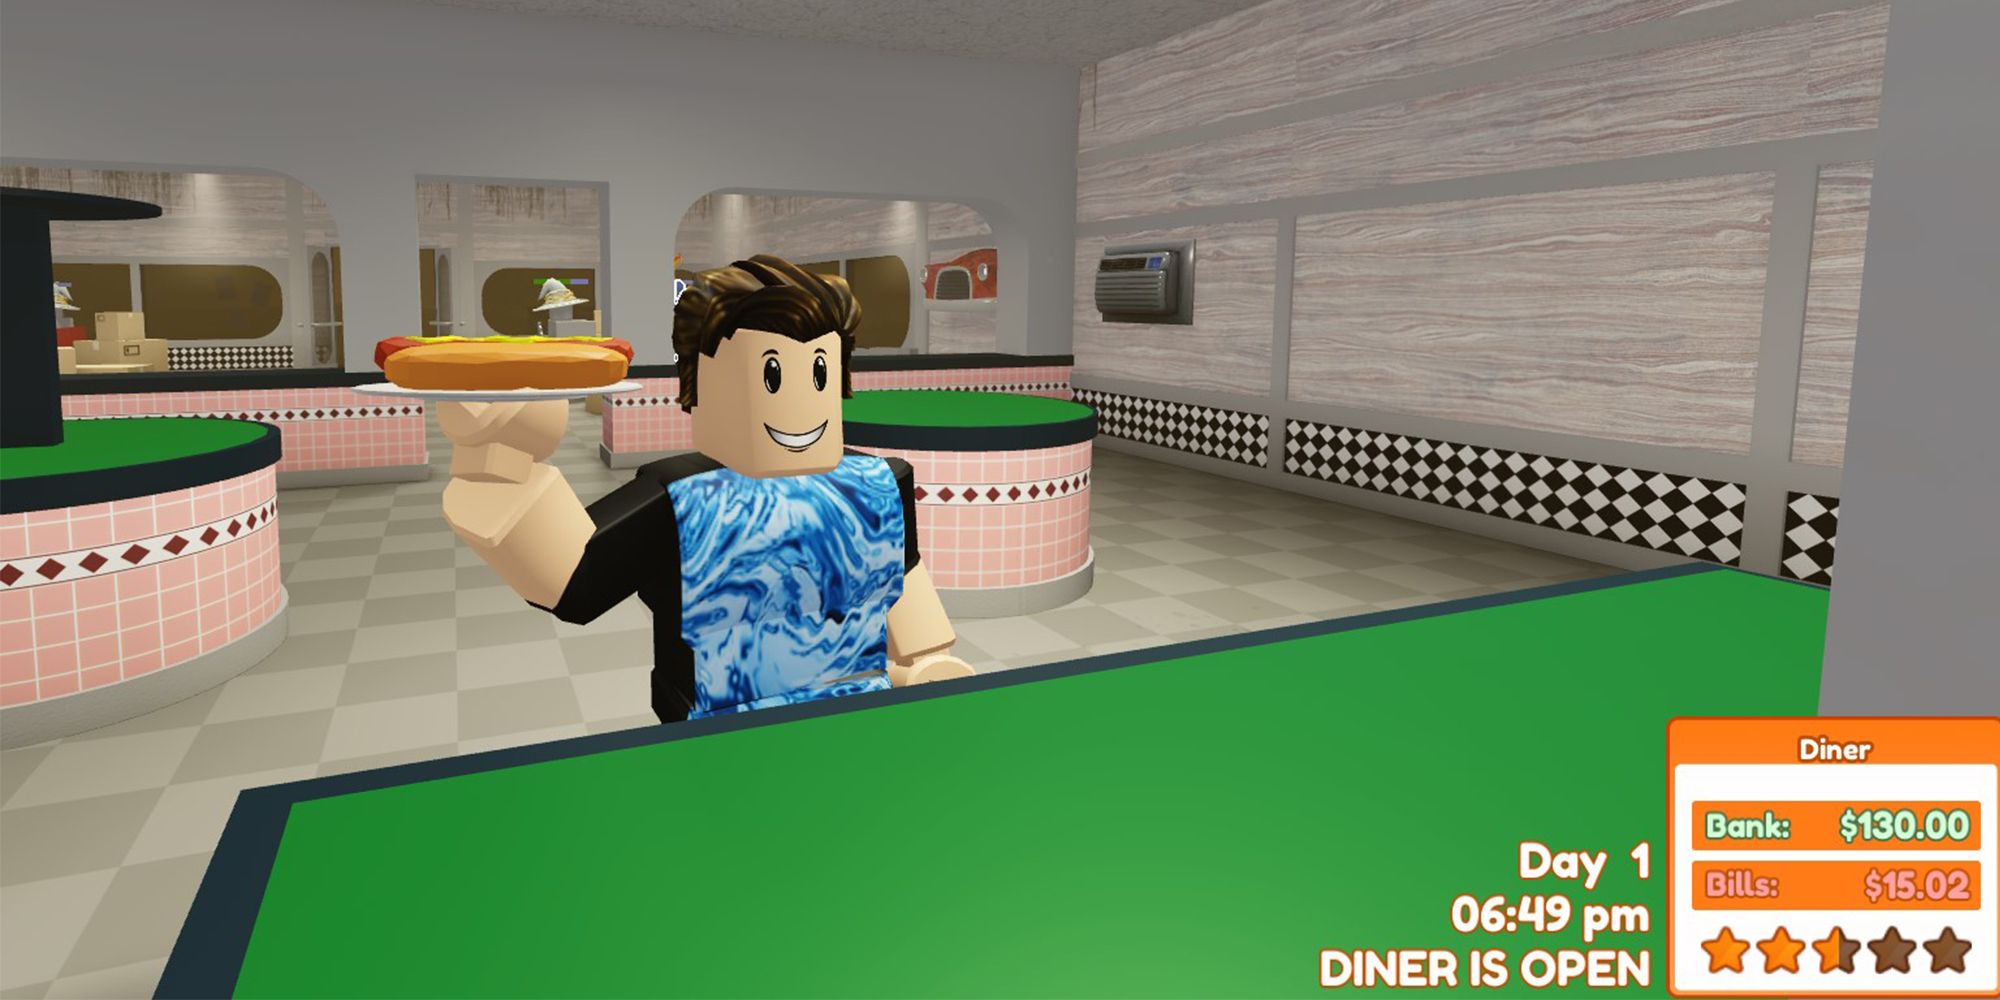 A diner server holds a hot dog on a plate inside a restaurant kitchen in the Roblox game, Diner Simulator.